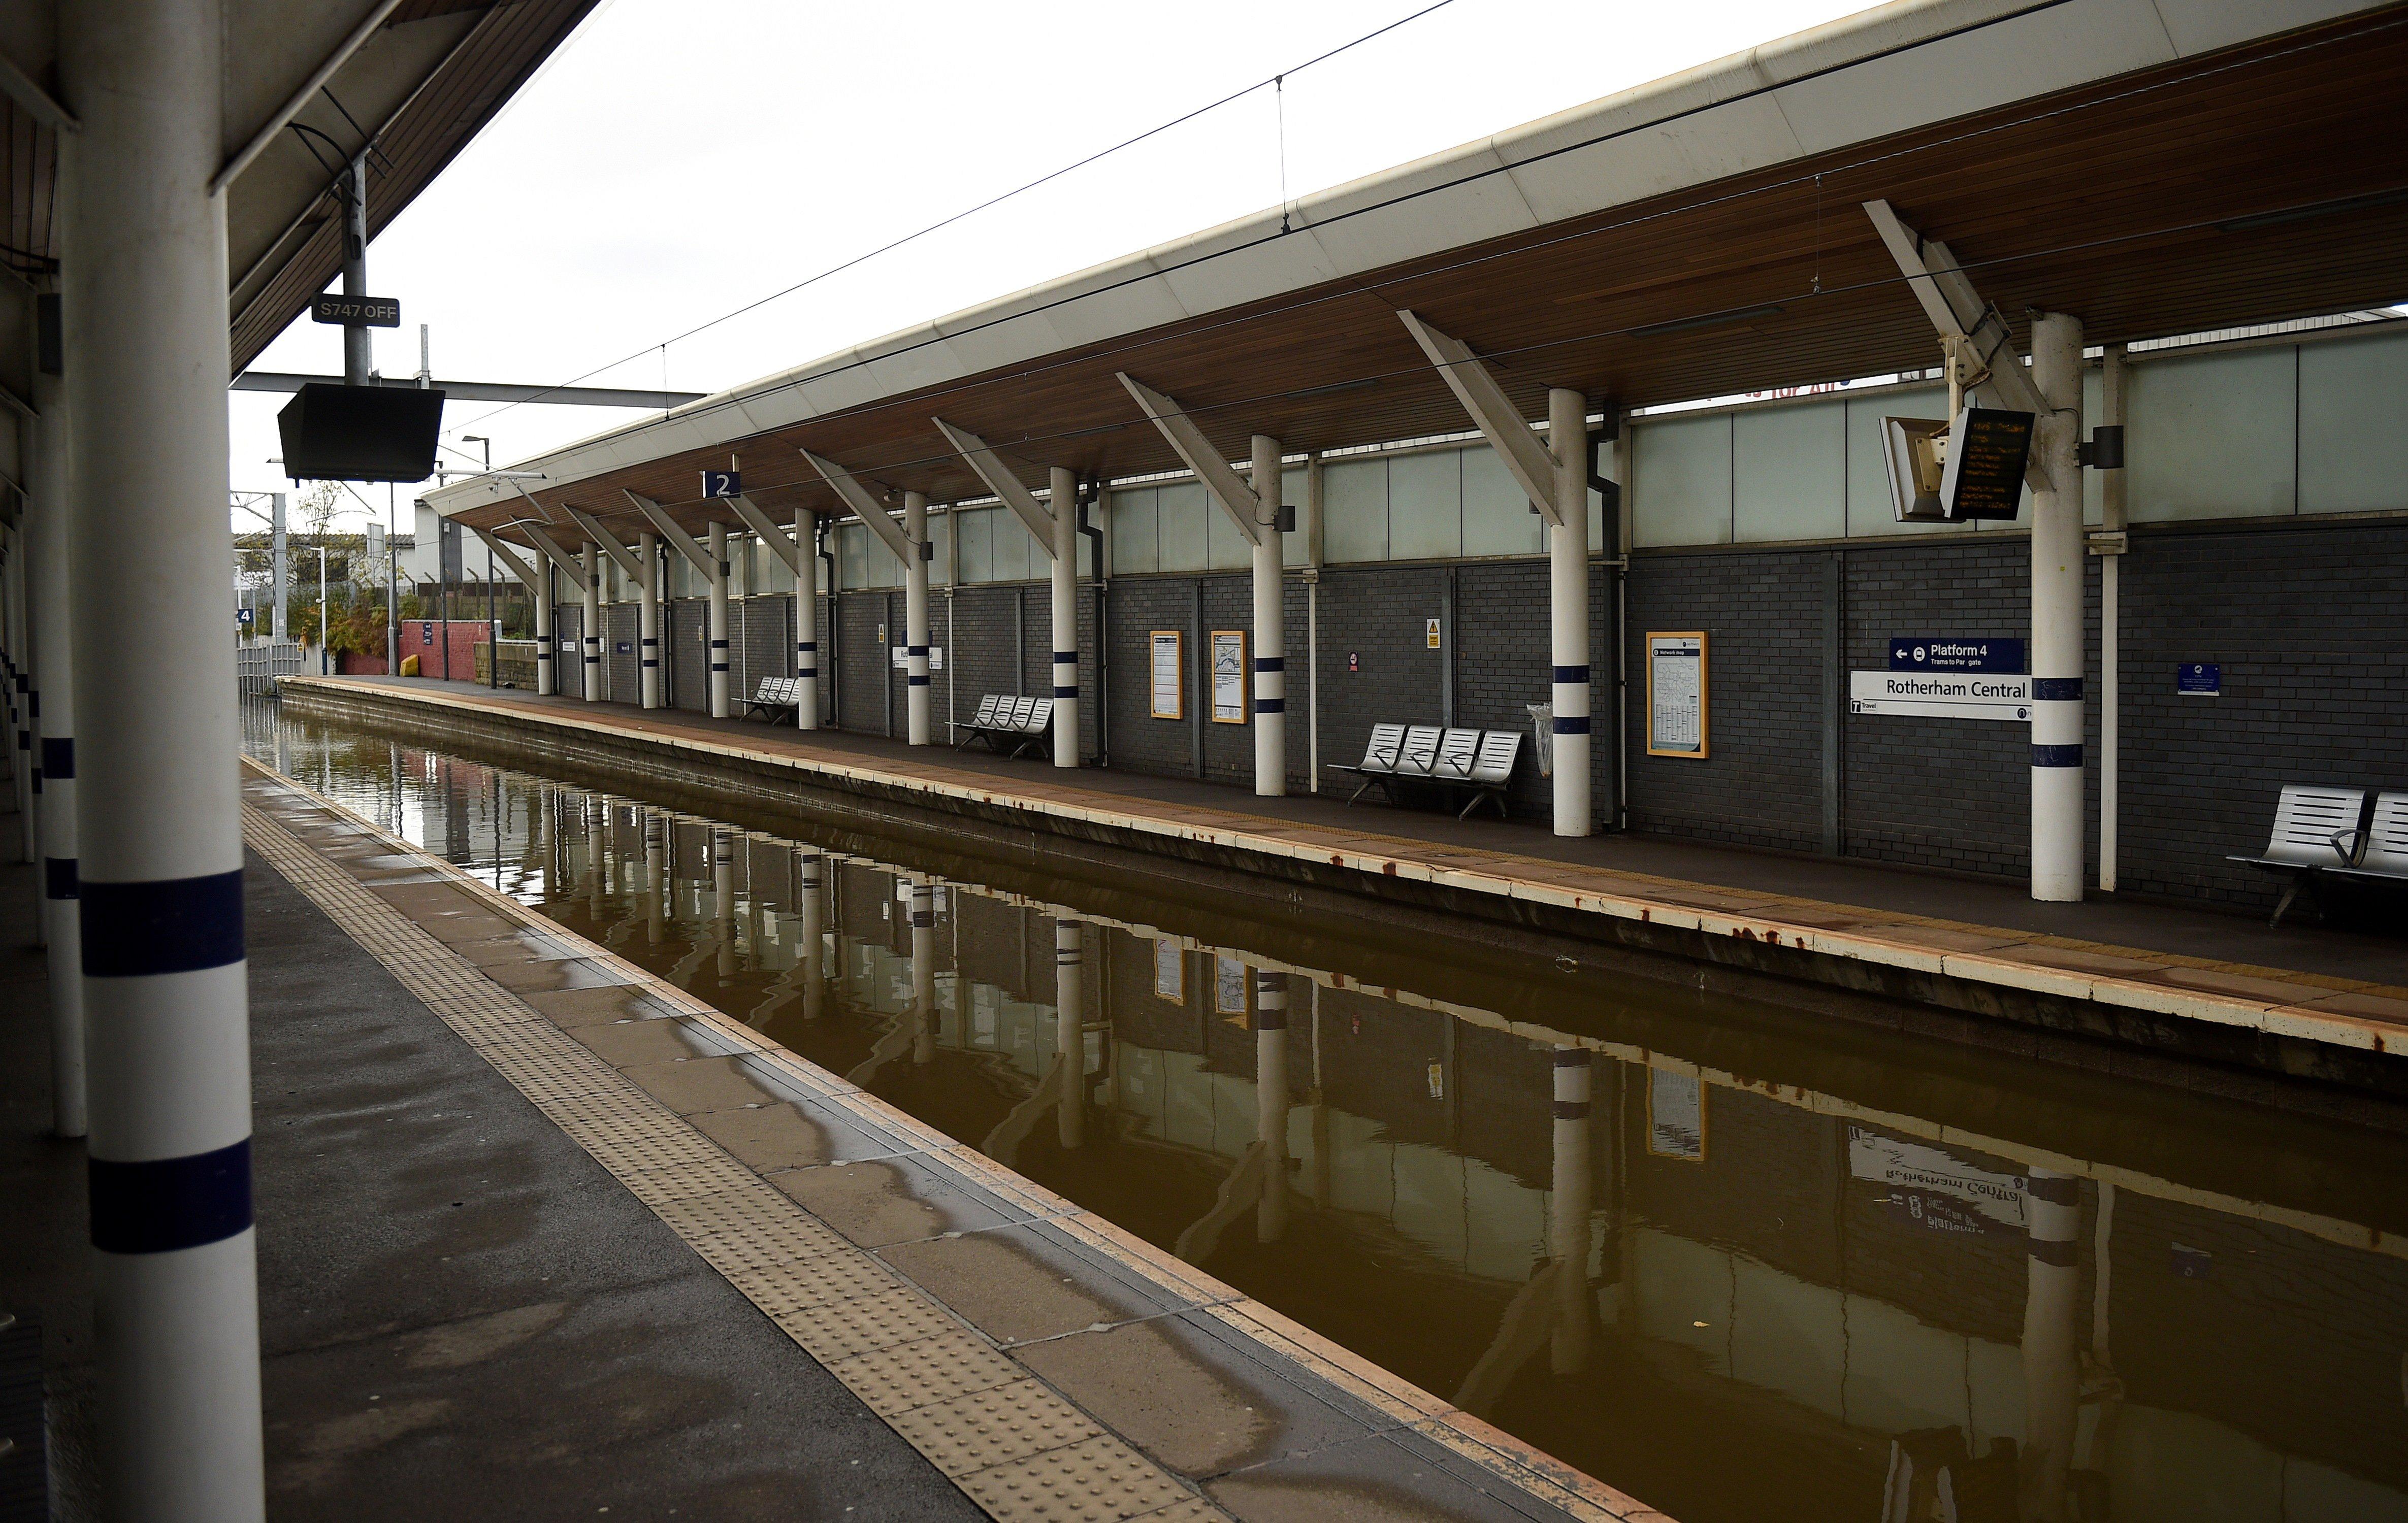 Heavy rain causes fresh flooding misery at Rotherham Central railway station - The Star